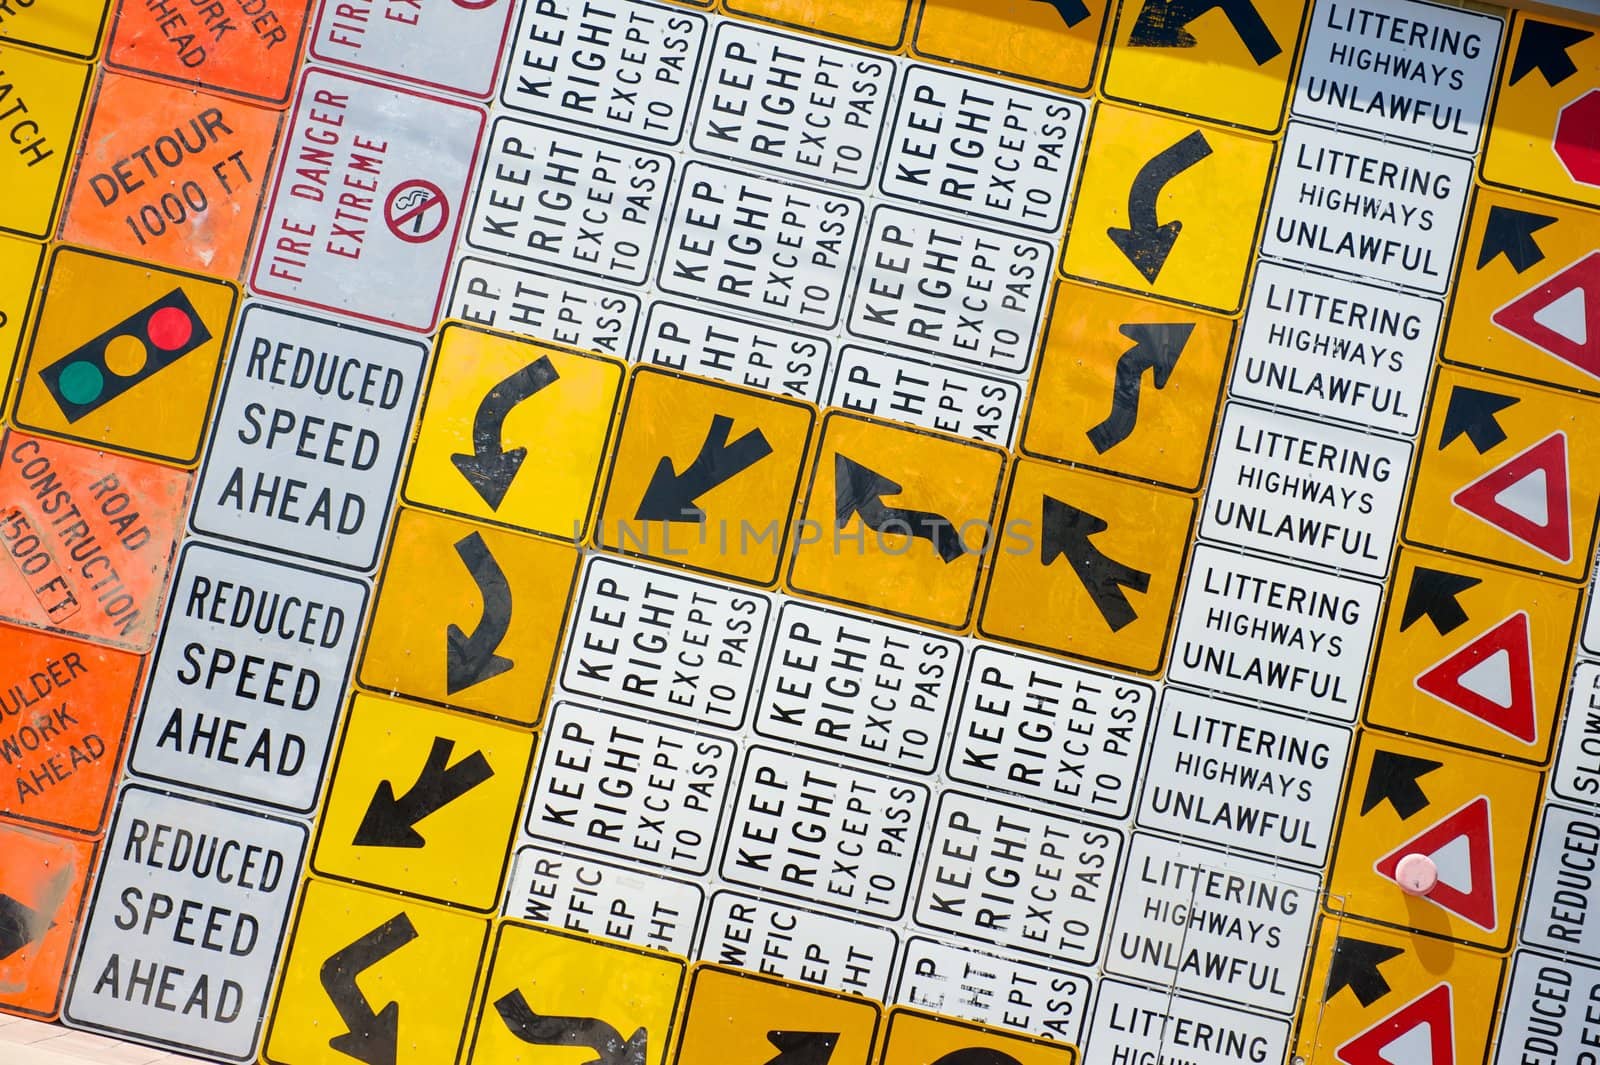 Wall of Road Warning Signs by pixelsnap